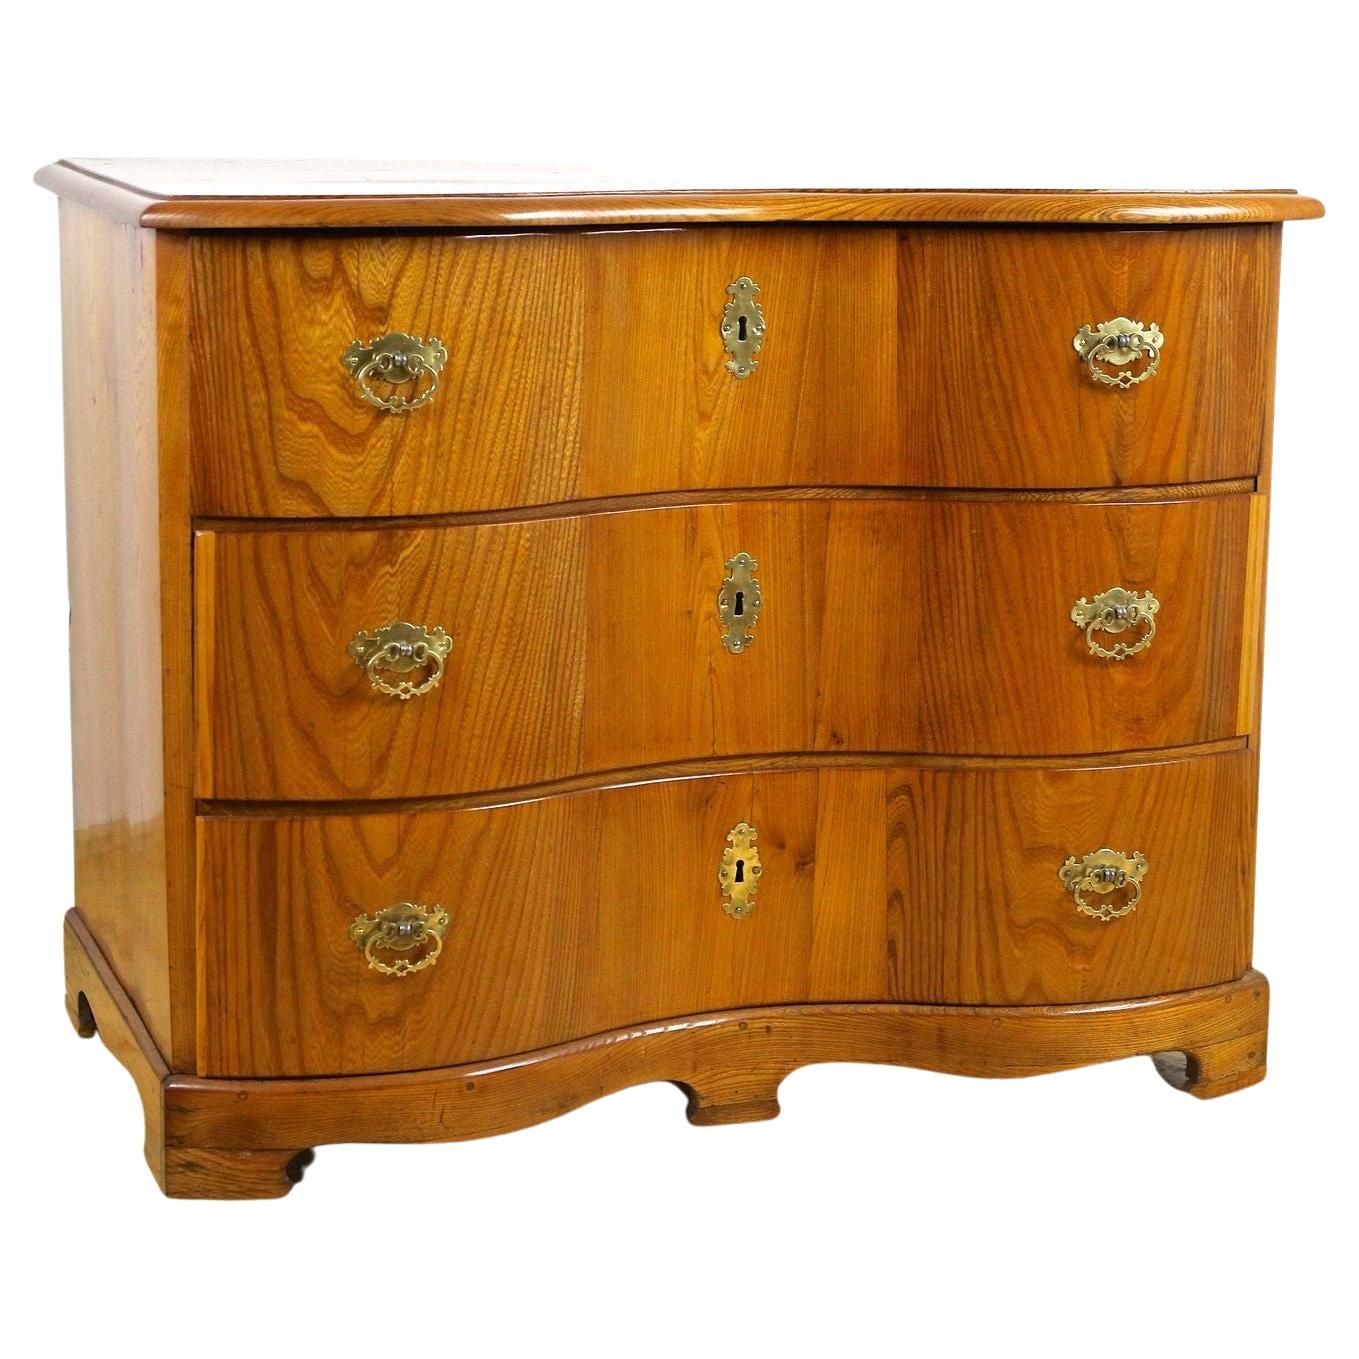 18th Century Elm Wood Baroque Chest of Drawers, South Germany, circa 1770